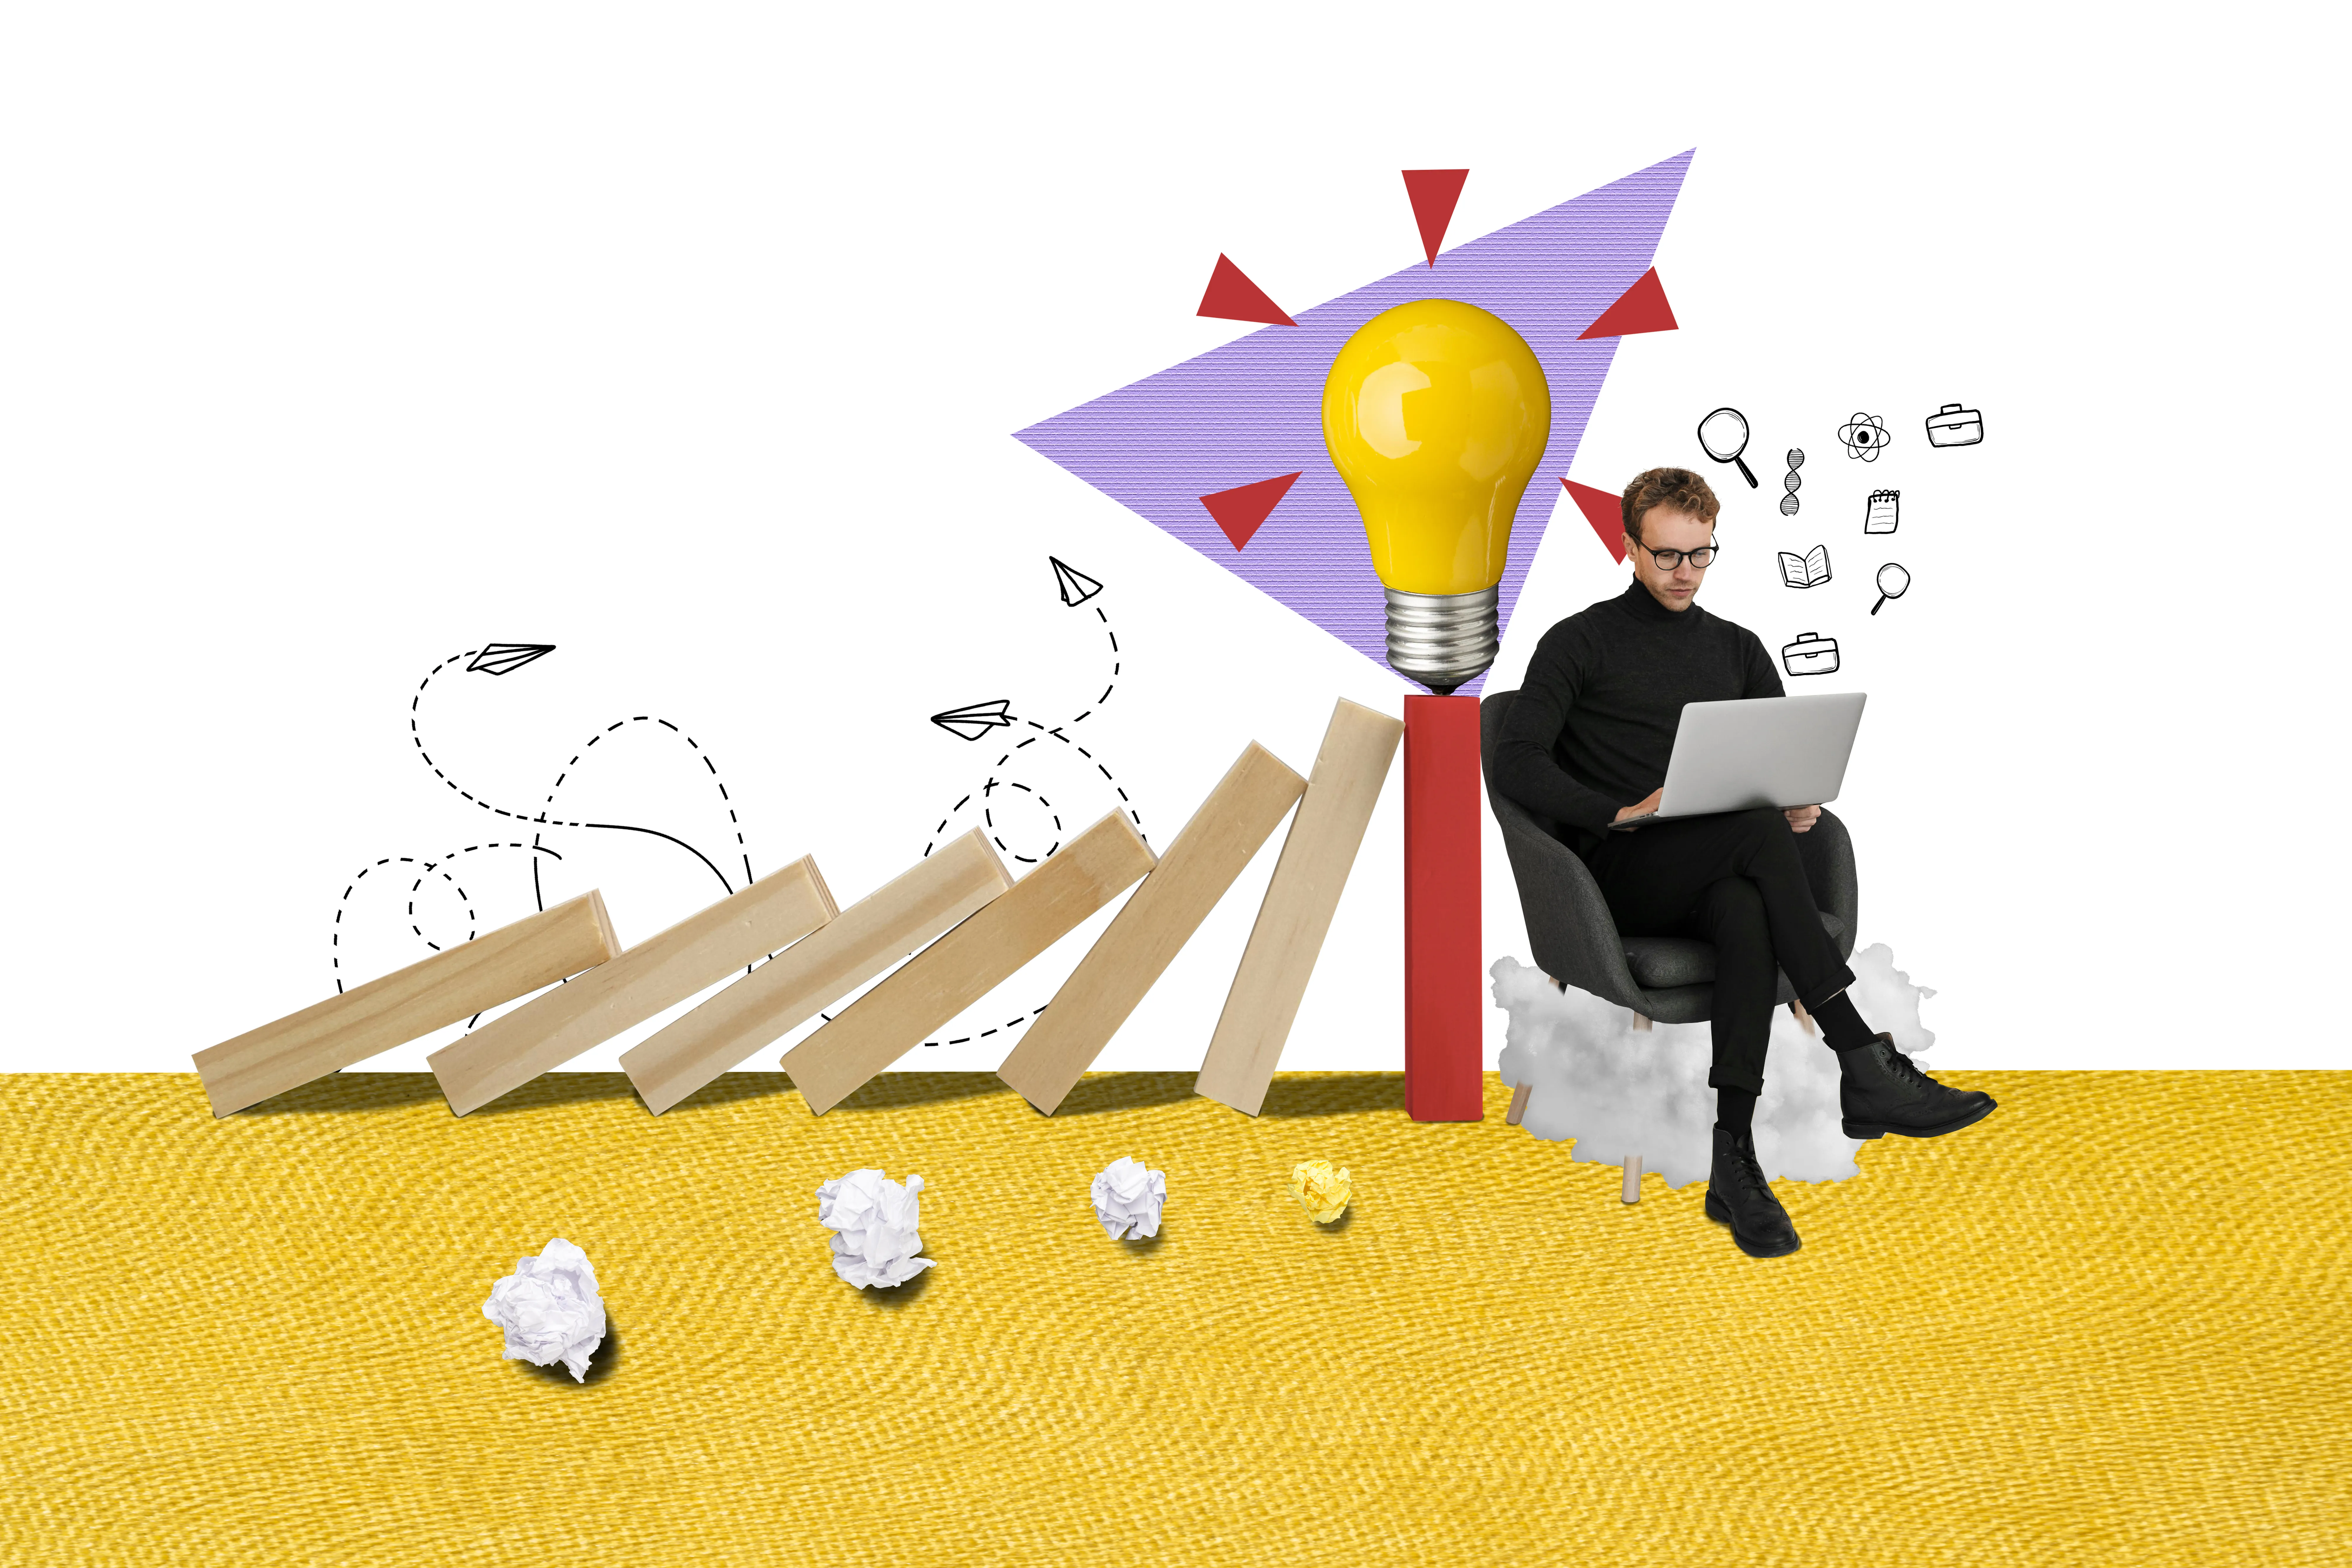 A creative composition with a person on a chair using a laptop, a bright light bulb representing an idea, and dominoes illustrating the impact of innovation.